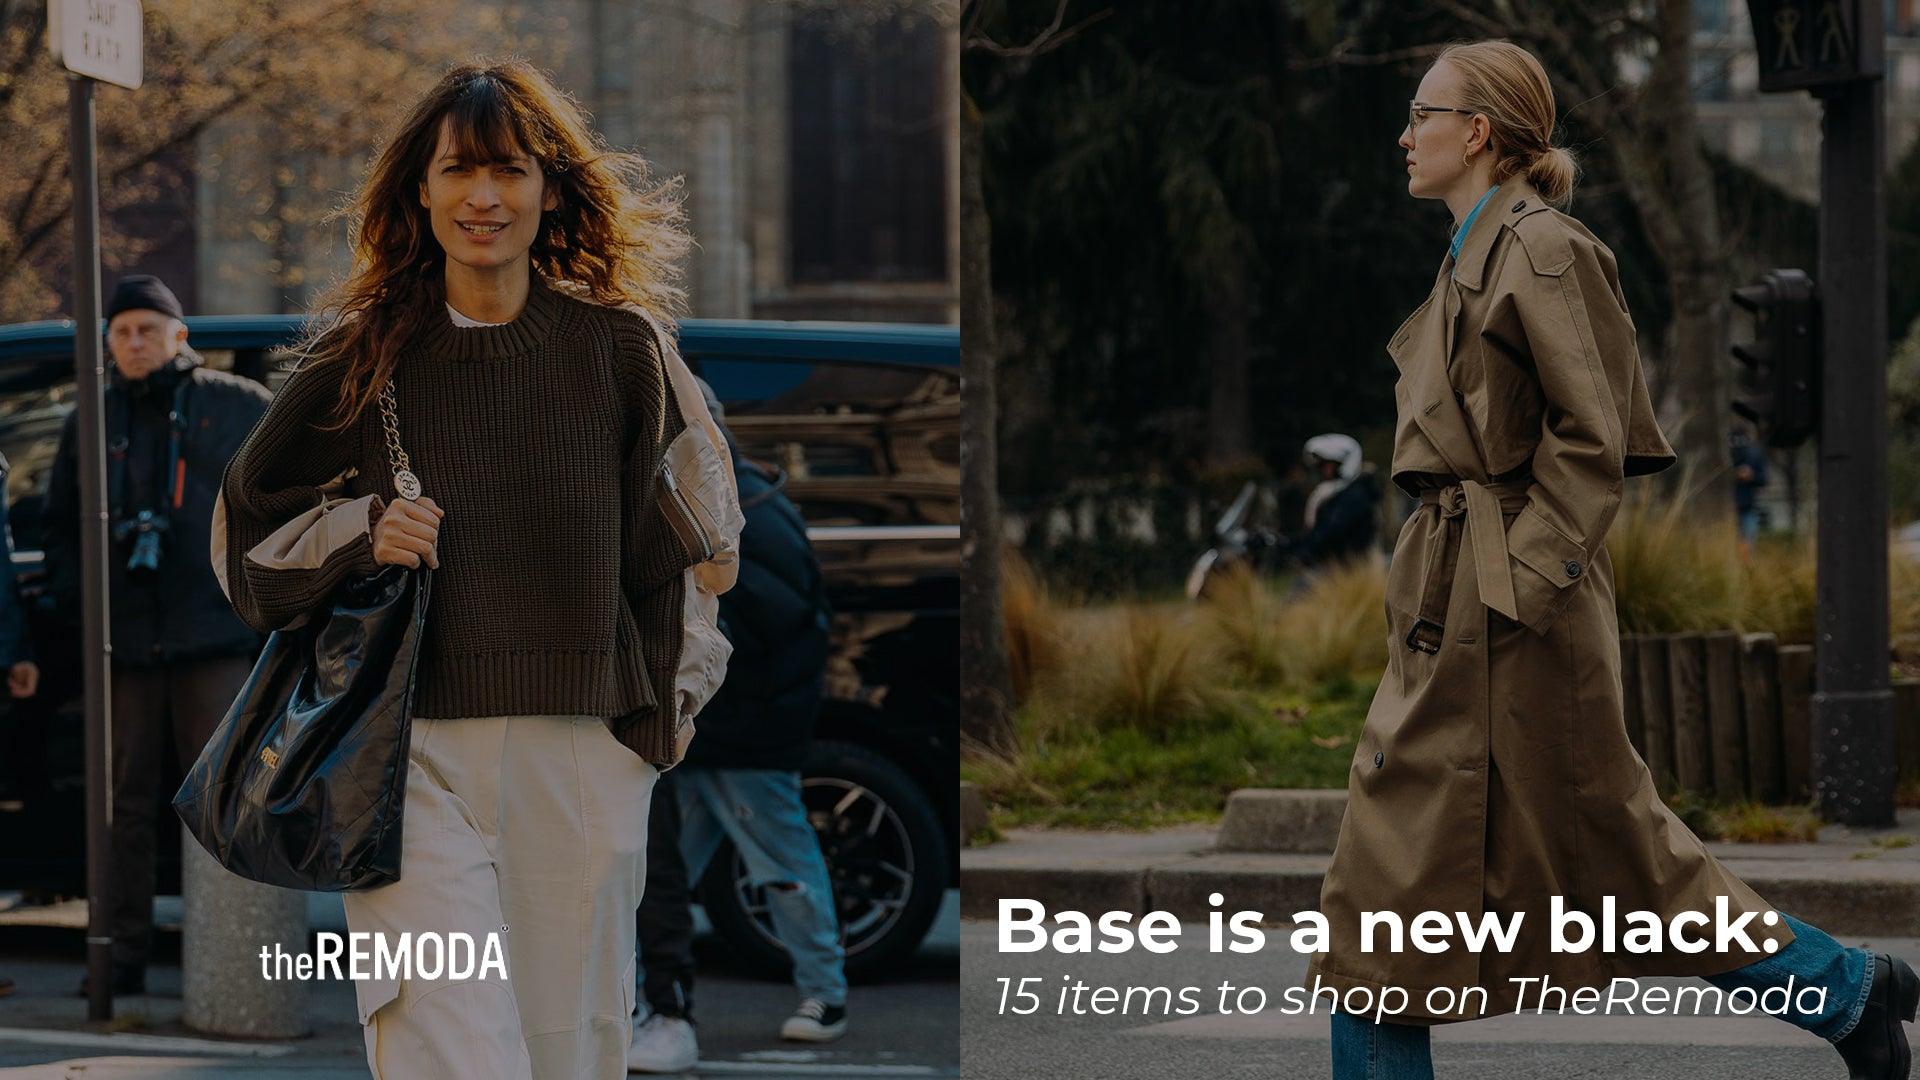 Base is a new black: 15 items to shop on TheRemoda - theREMODA